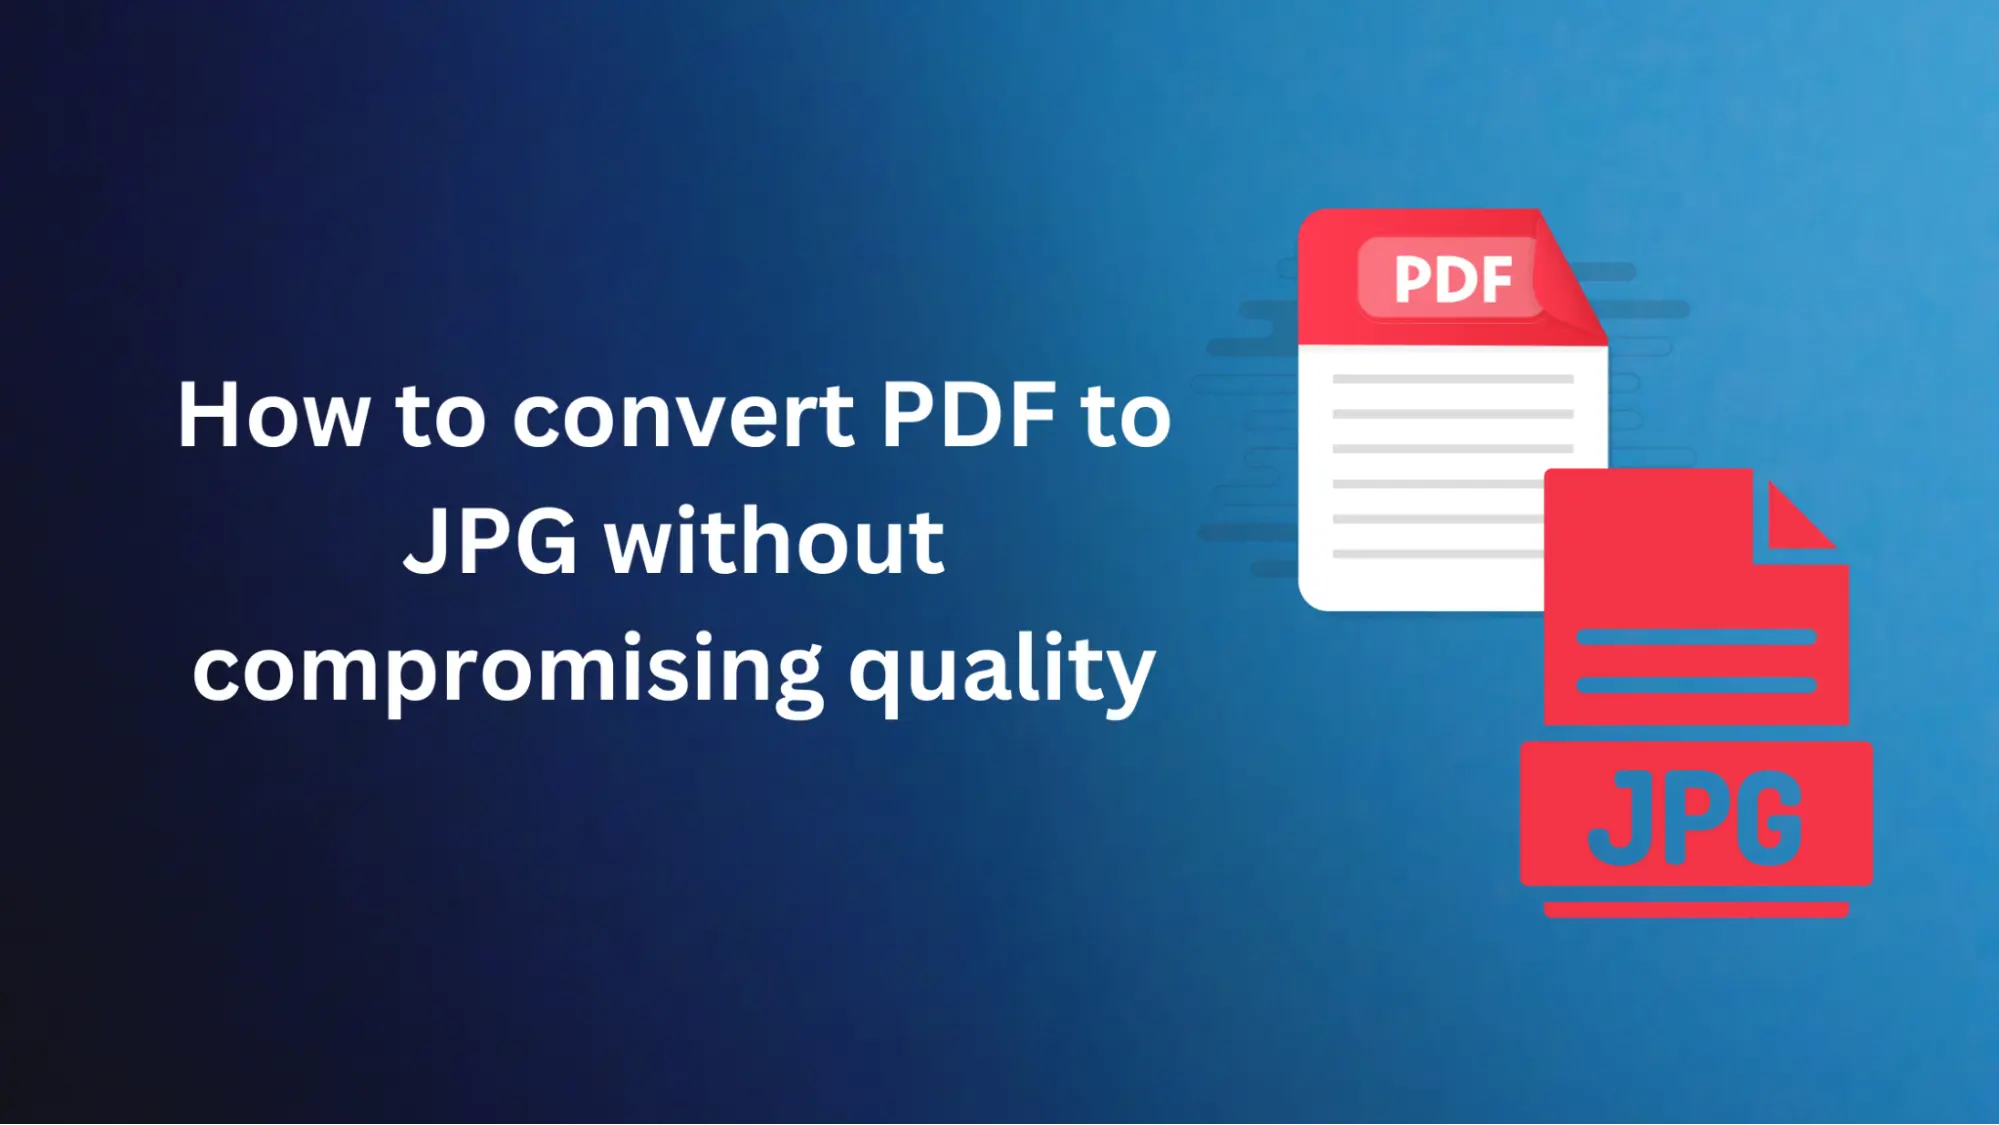 How to convert PDF to JPG without compromising quality